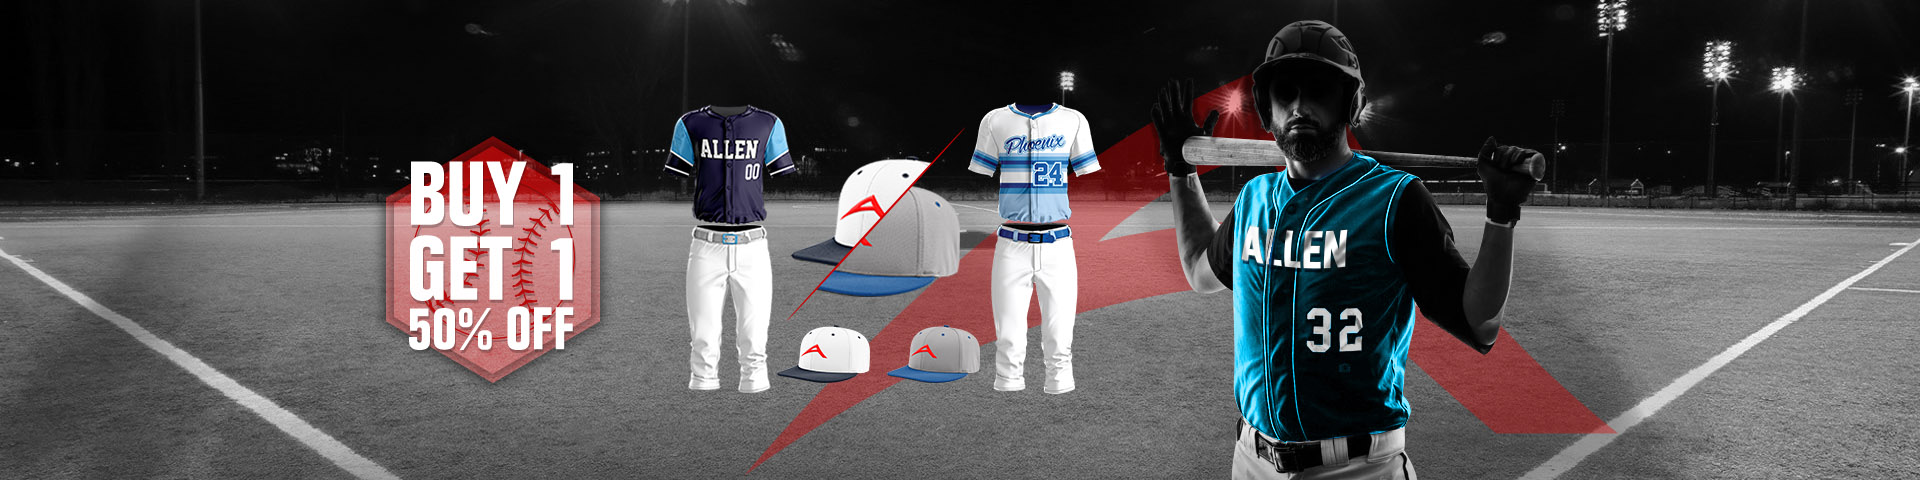 Baseball Uniforms, Packages